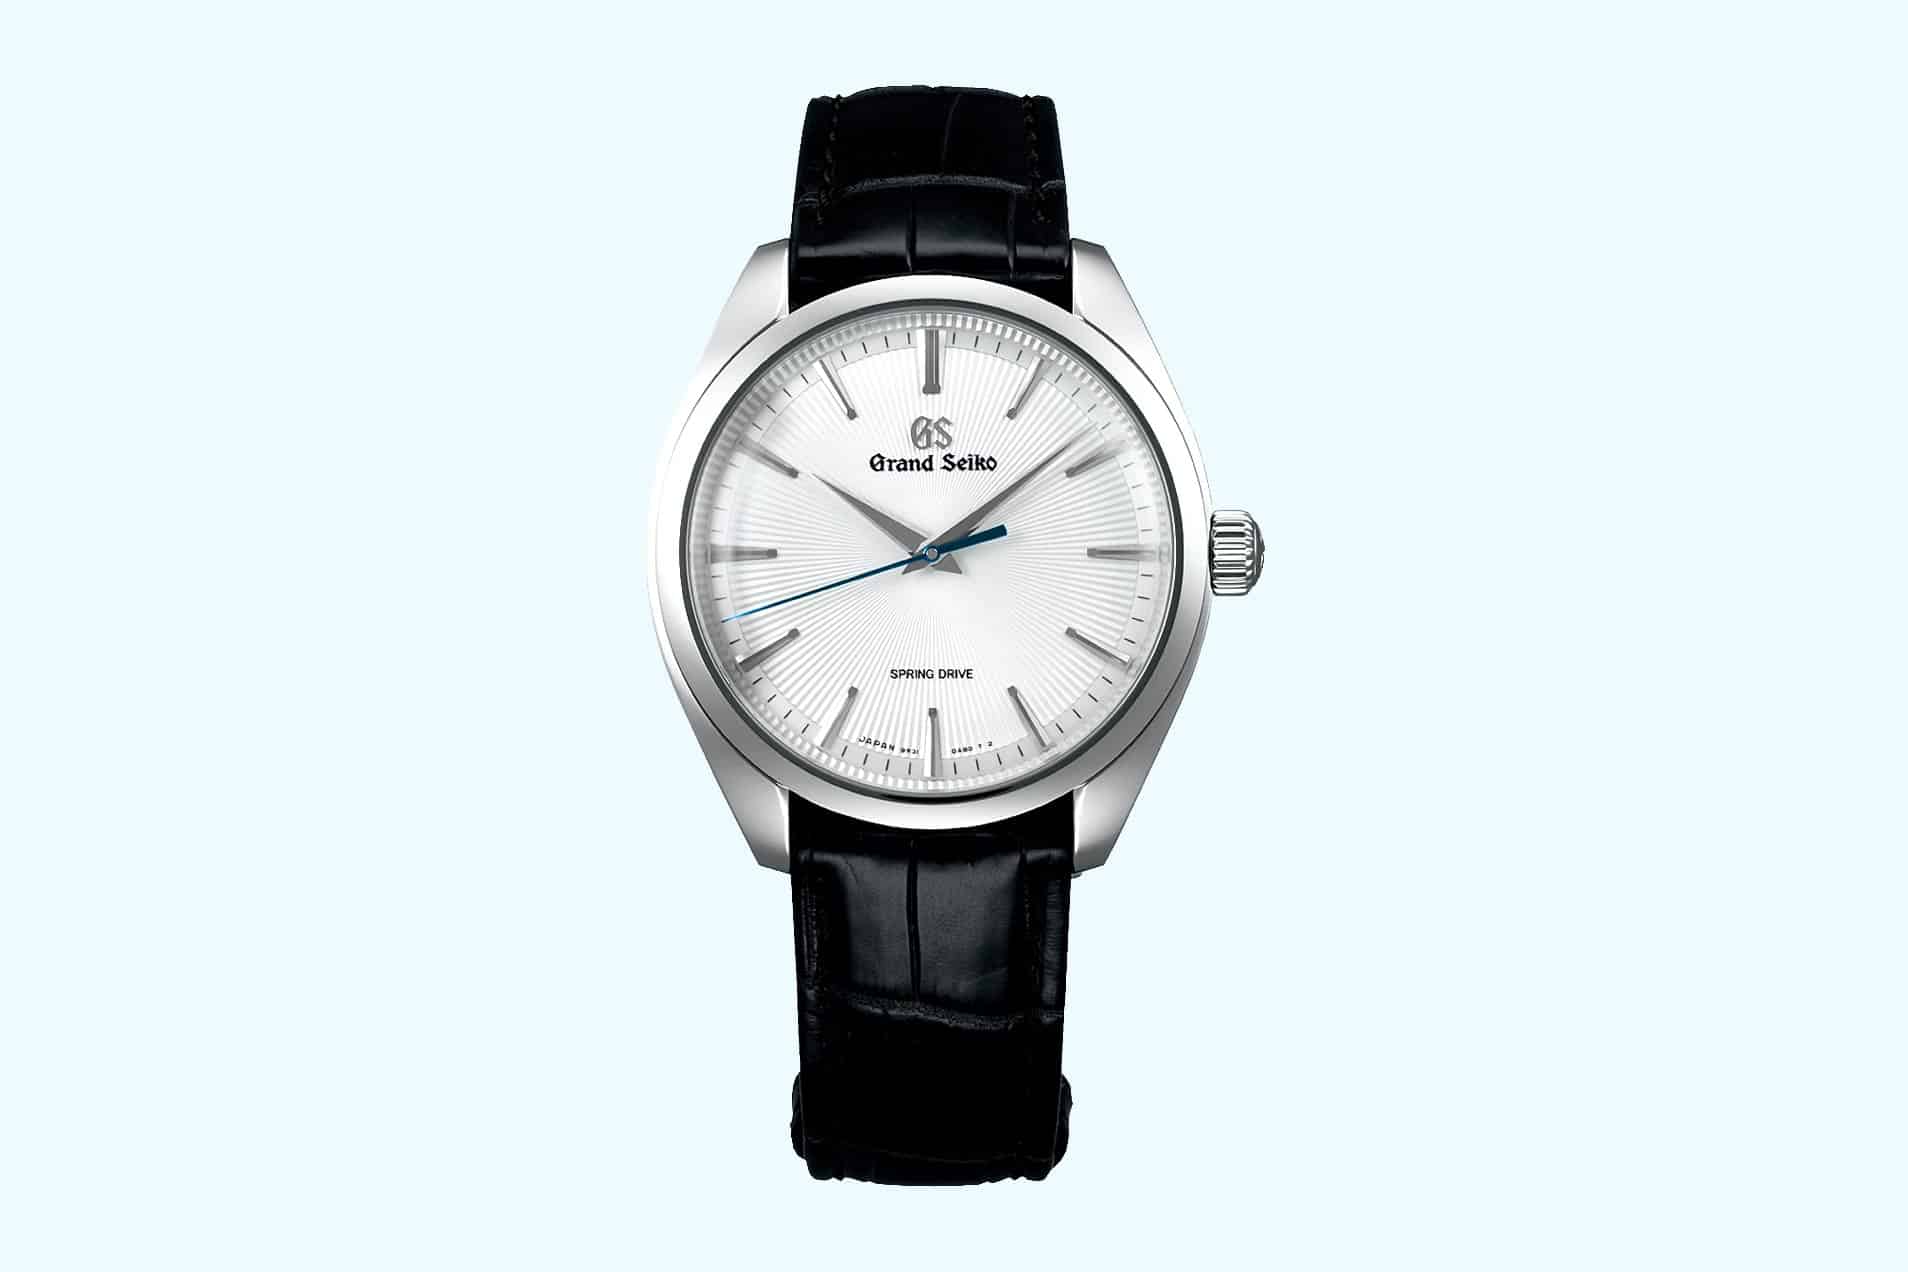 Baselworld 2019: First Look at the Grand Seiko Elegance SBGY003 - Worn &  Wound